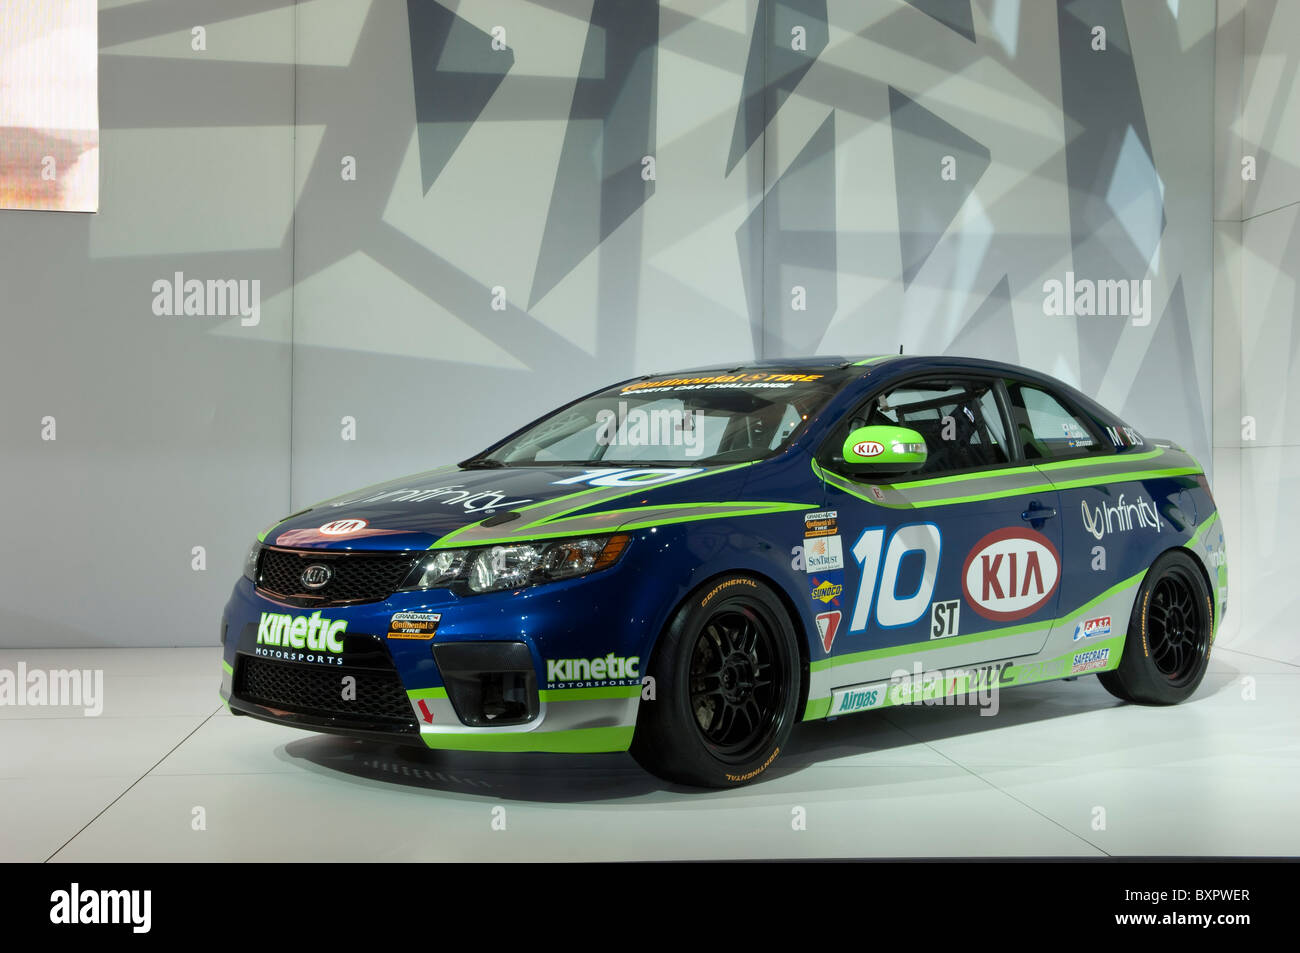 Kia Grand-Am Forte Koup race car at the 2010 North American International Auto Show in Detroit Stock Photo